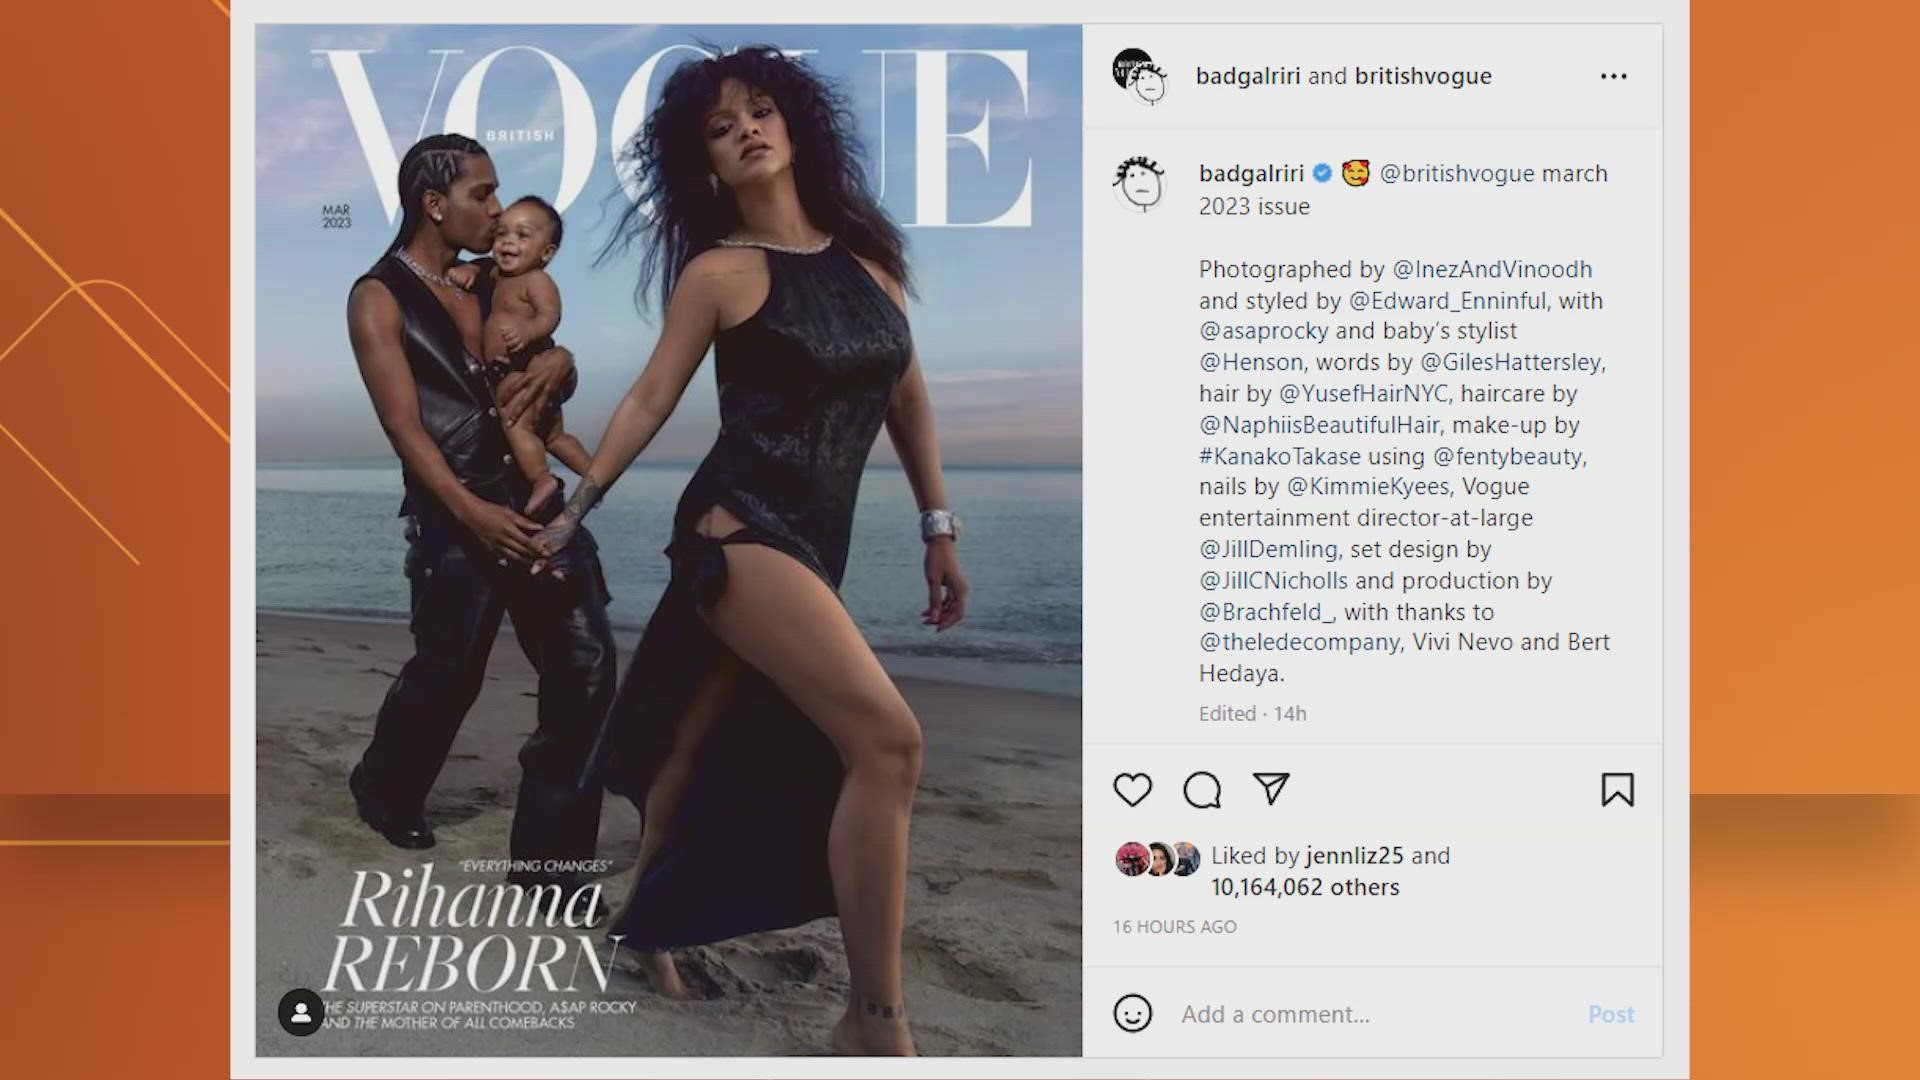 Rihanna, A$AP Rocky and their son are seen in the photos. The singer shared on social media that she was pregnant during the photoshoot and didn't know at the time.